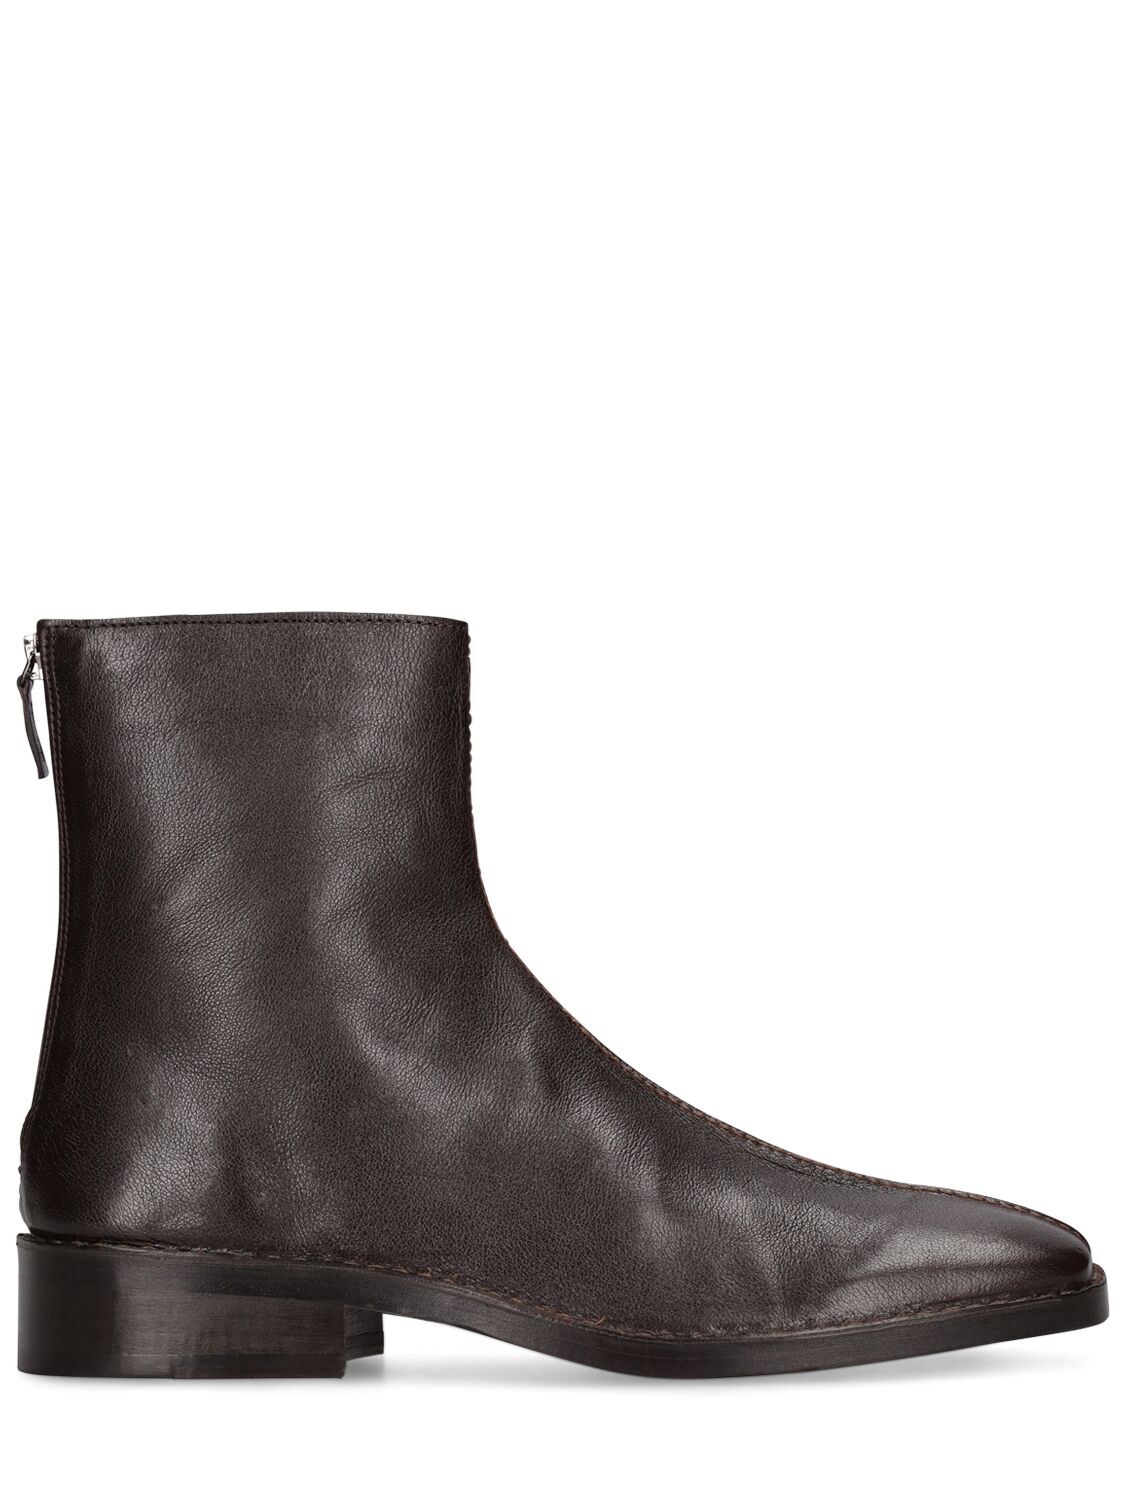 Image of Leather Zip Ankle Boots